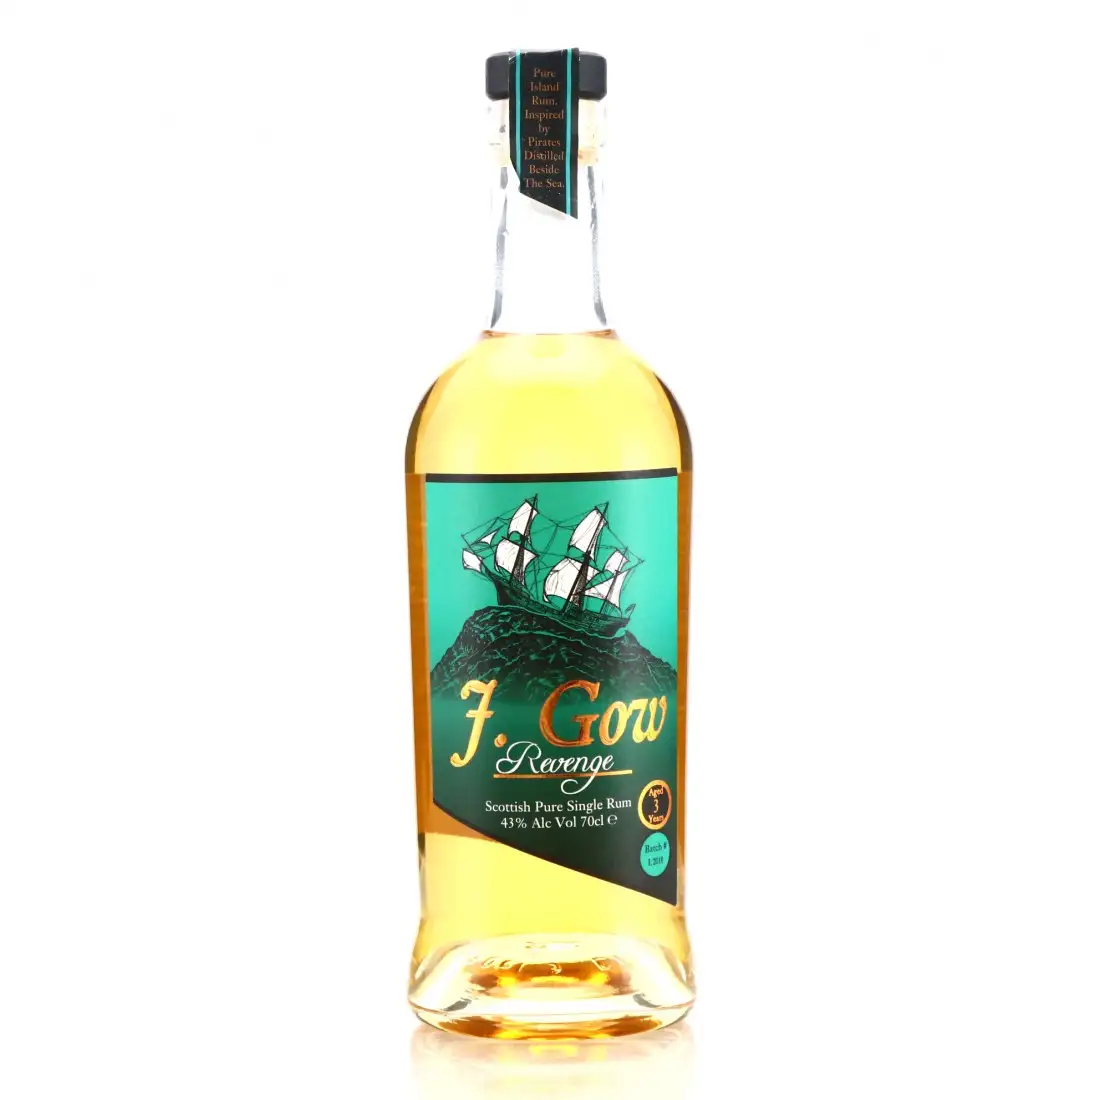 Image of the front of the bottle of the rum J. Gow Revenge